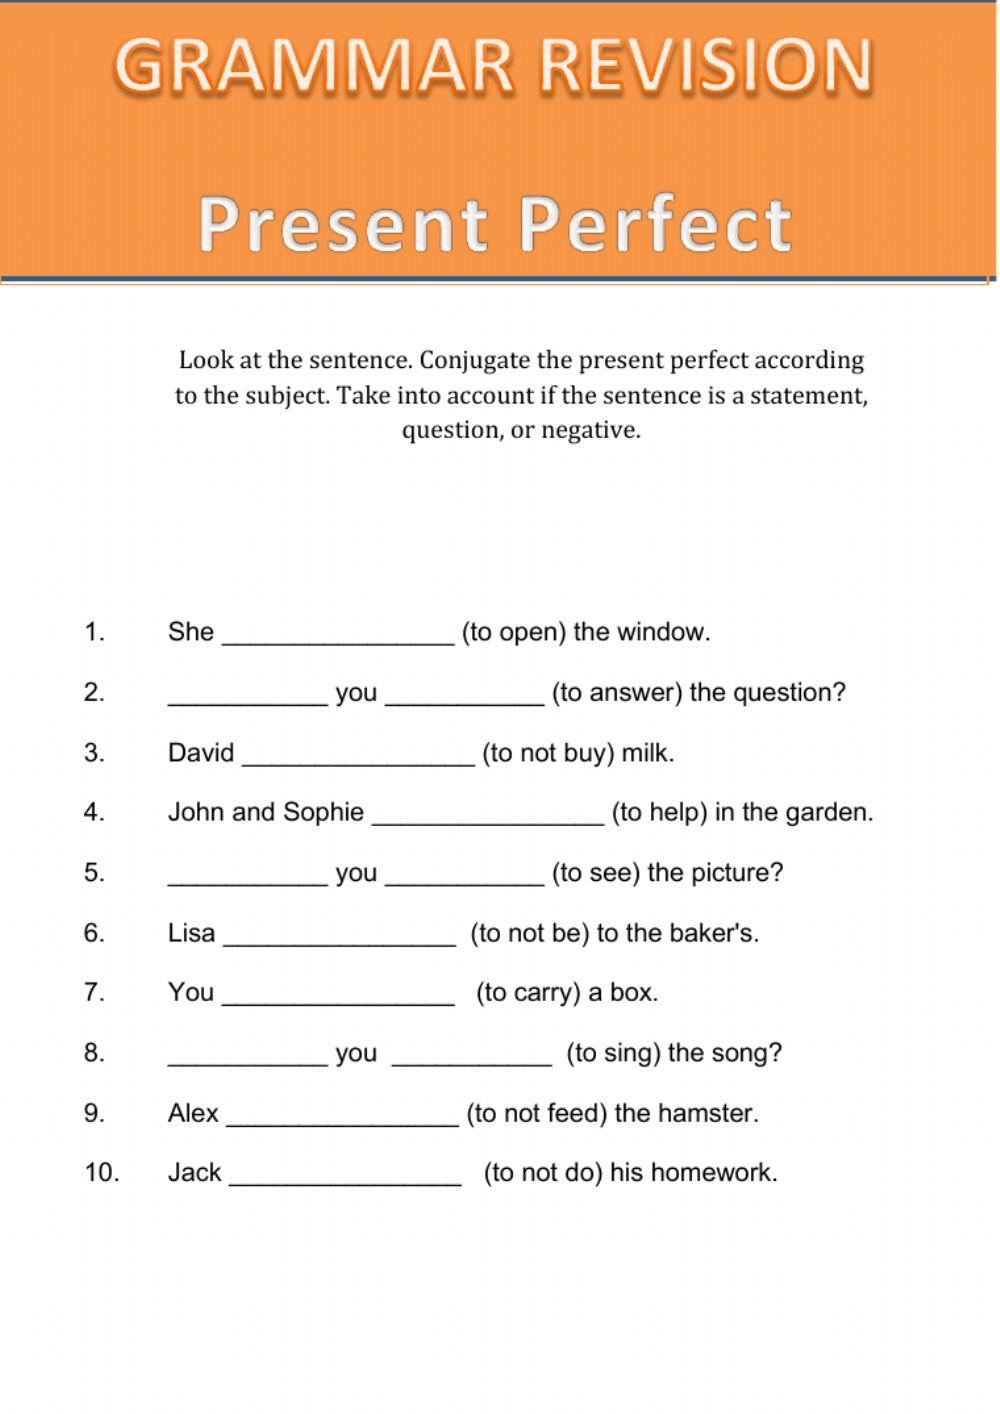 Present Perfect simple